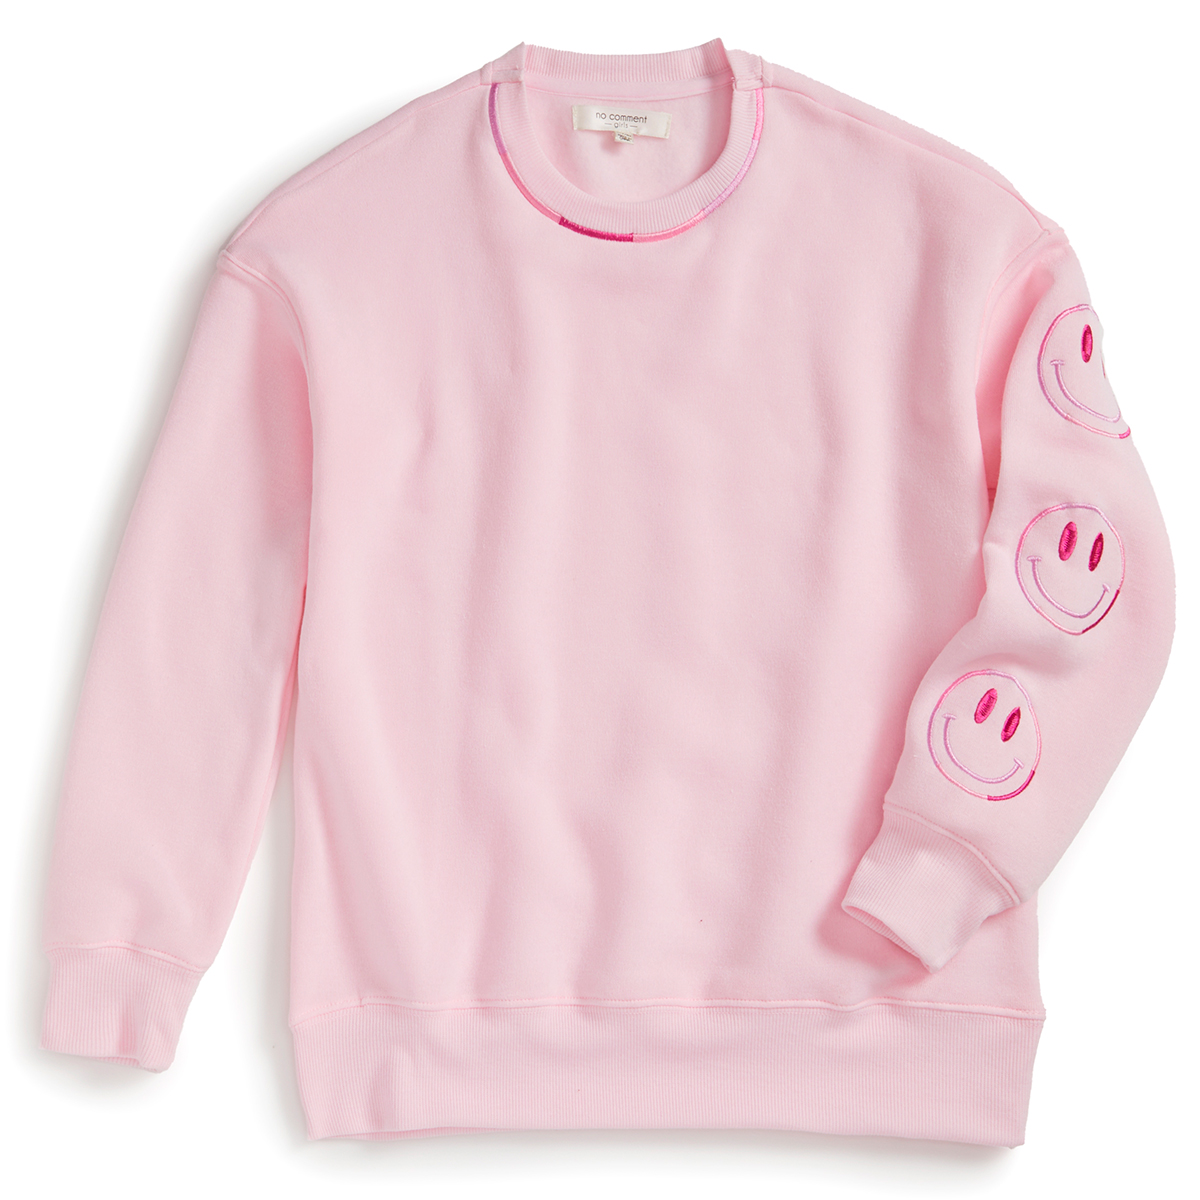 No Comment Girls' Embroidered Fleece Crew